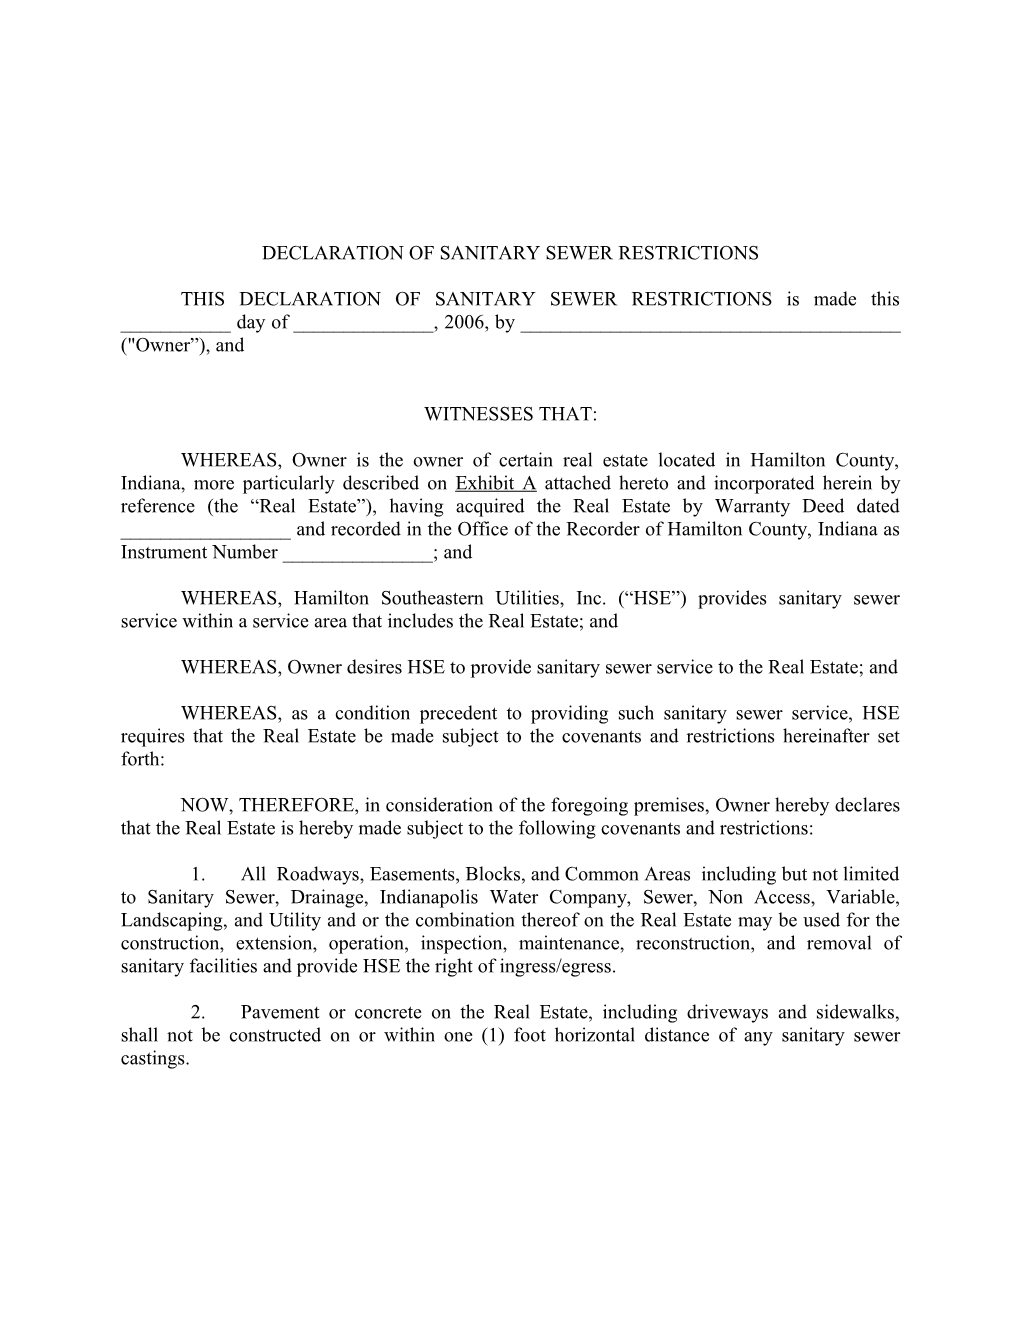 Declaration of Sanitary Sewer Restrictions